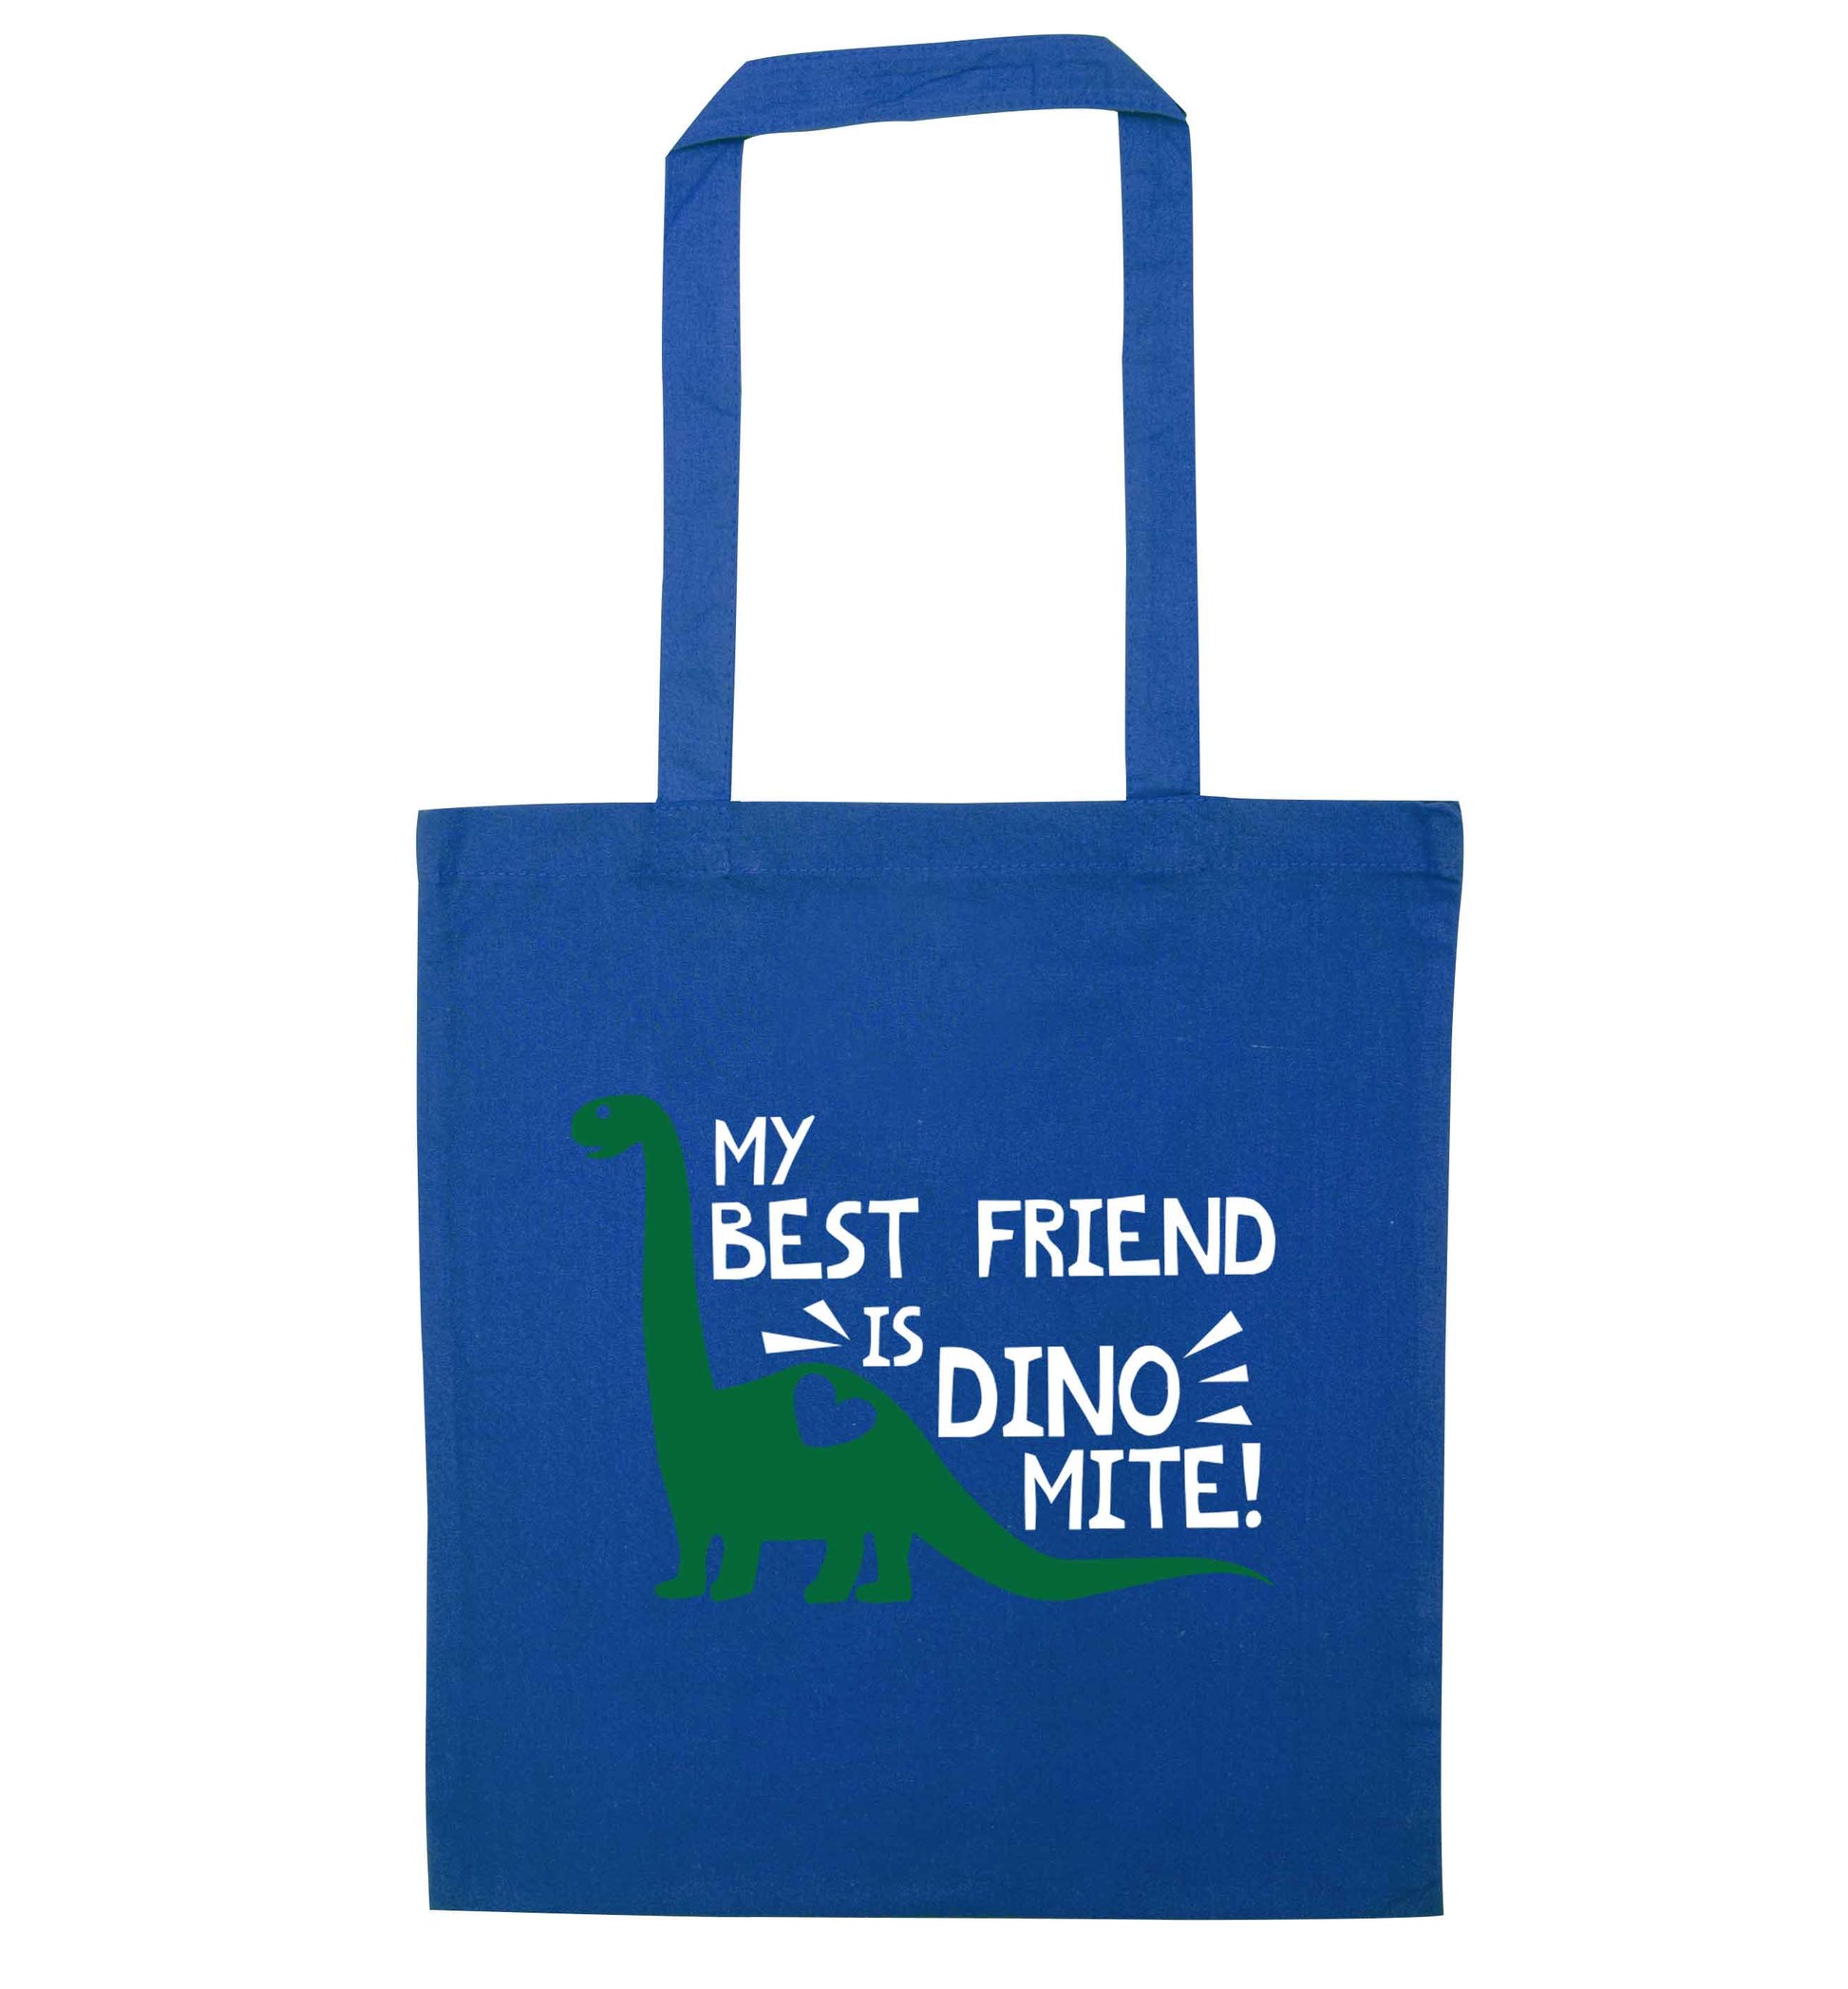 My cousin is dinomite! blue tote bag